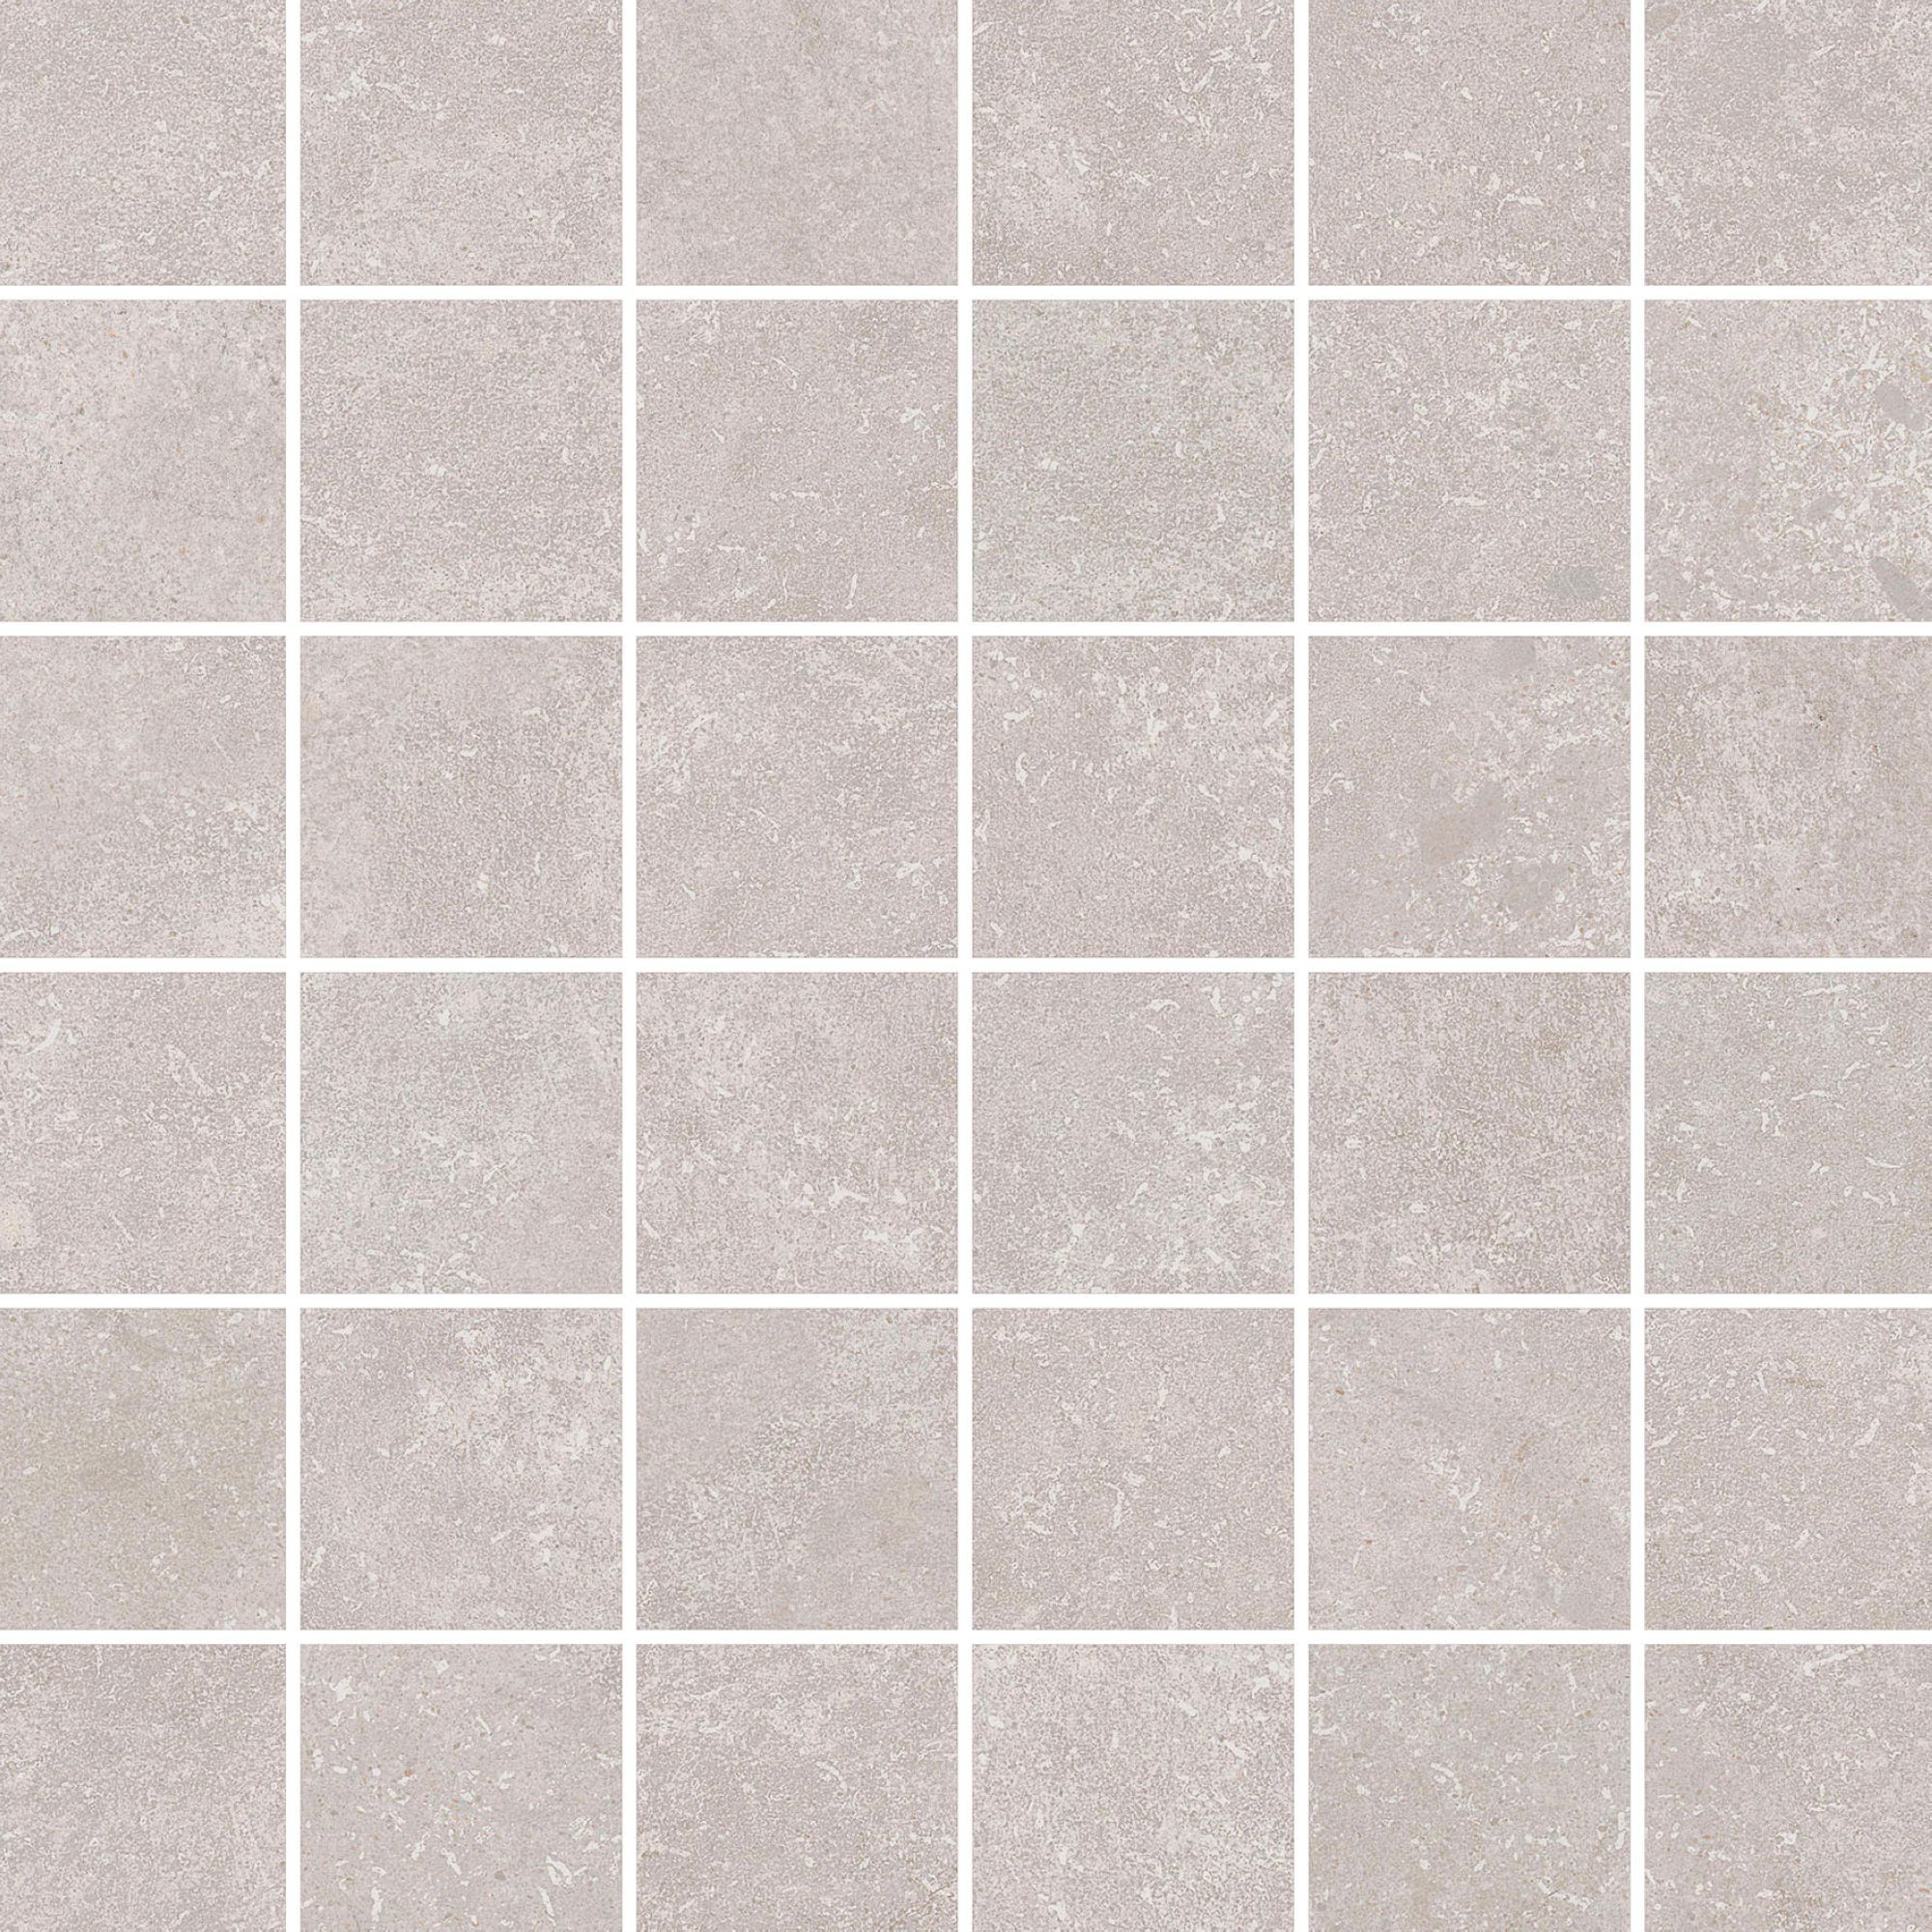 Mosaikfliese 'Stonelevel' greige 29,7 x 29,7 x 0,9 cm + product picture